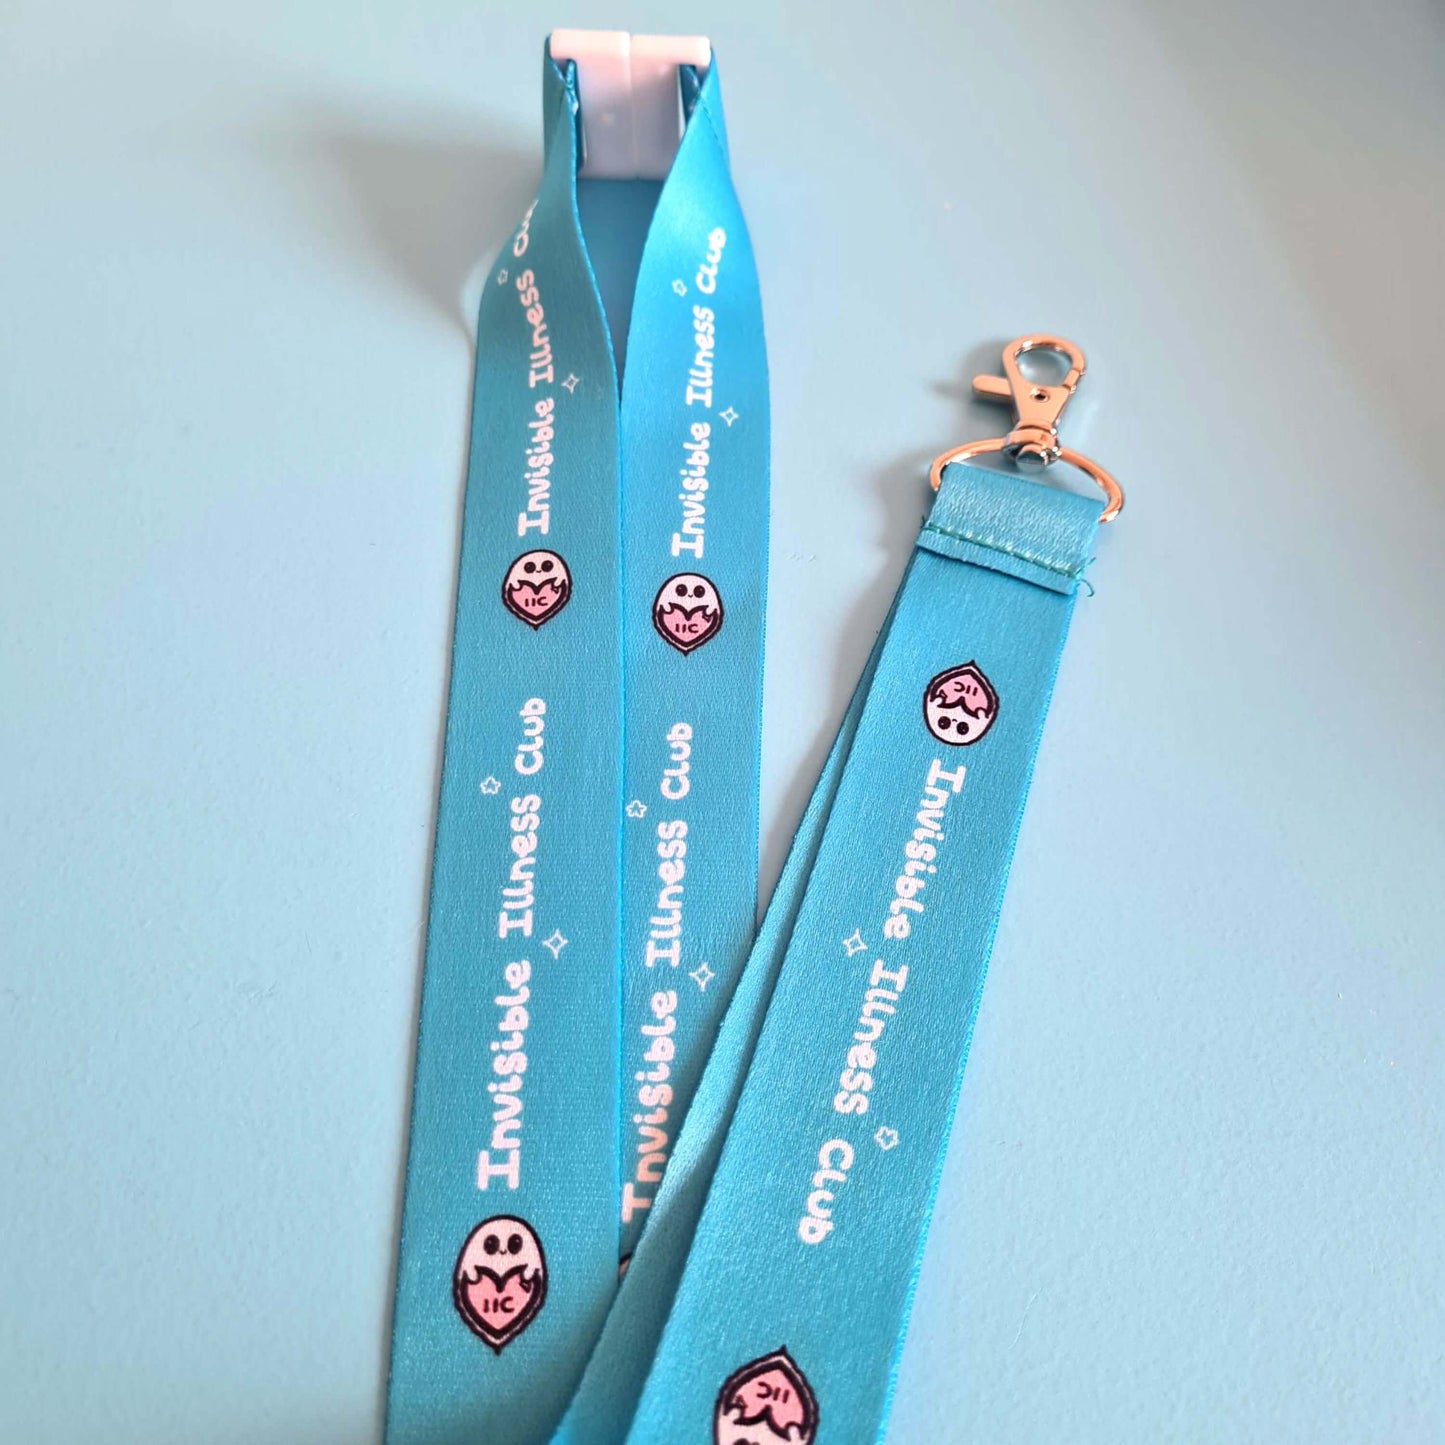 The Invisible Illness Club Lanyard on a pastel blue background. The pastel blue lanyard has repeating white text reading 'invisible illness club' and innabox pastel ghost logo. It has a silver lobster clip and white safety break. The hand drawn design is raising awareness for hidden disabilities.